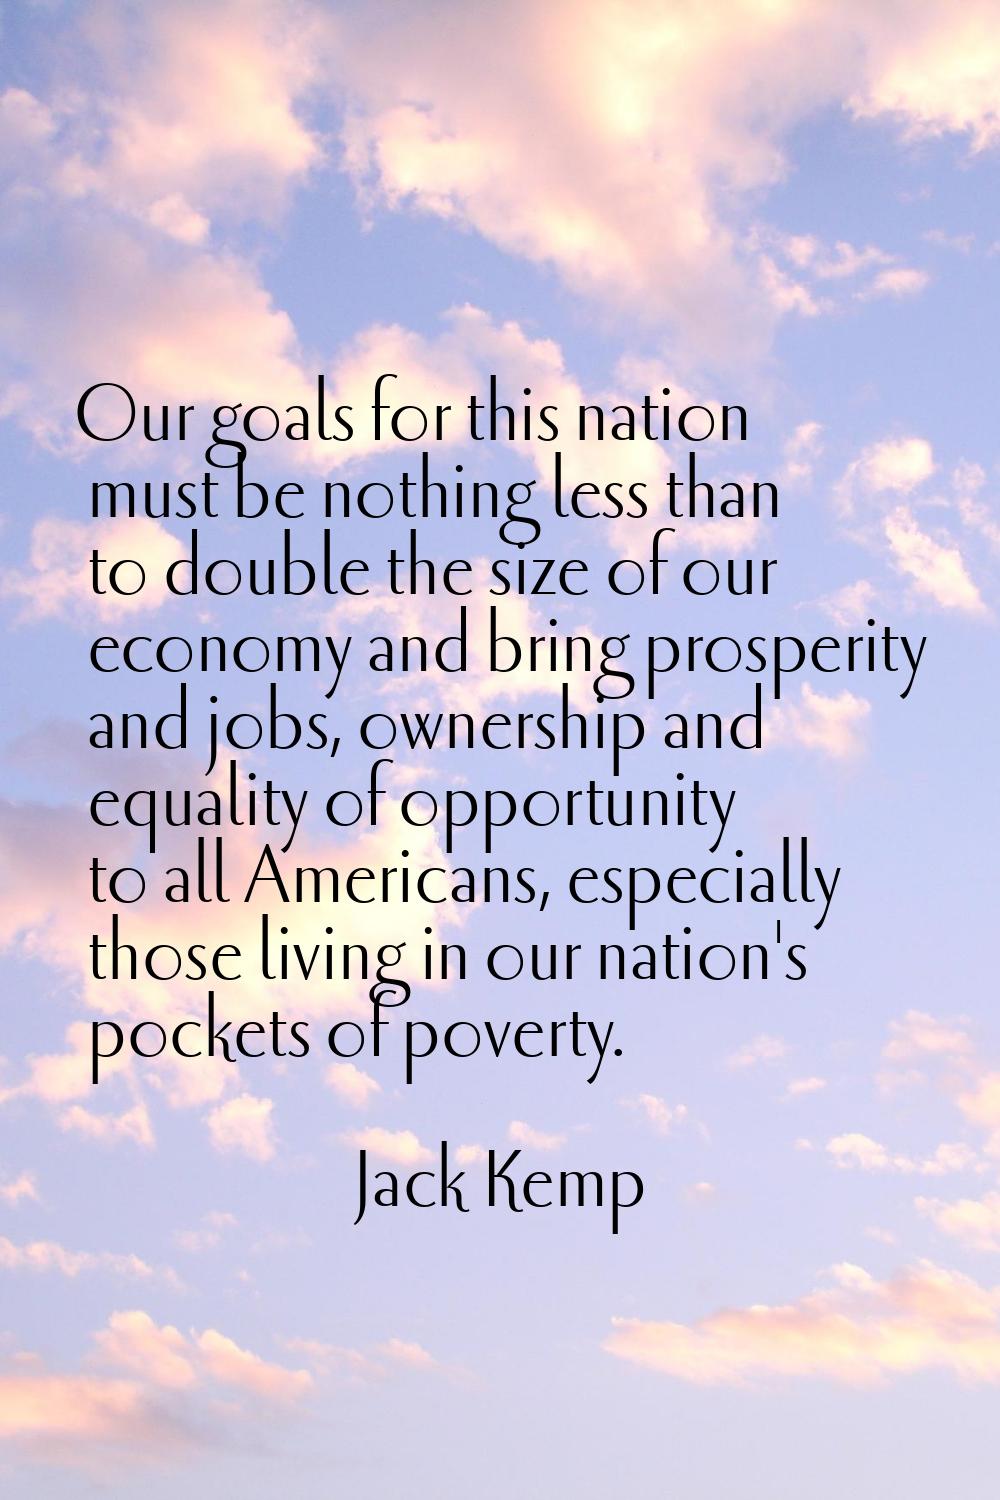 Our goals for this nation must be nothing less than to double the size of our economy and bring pro